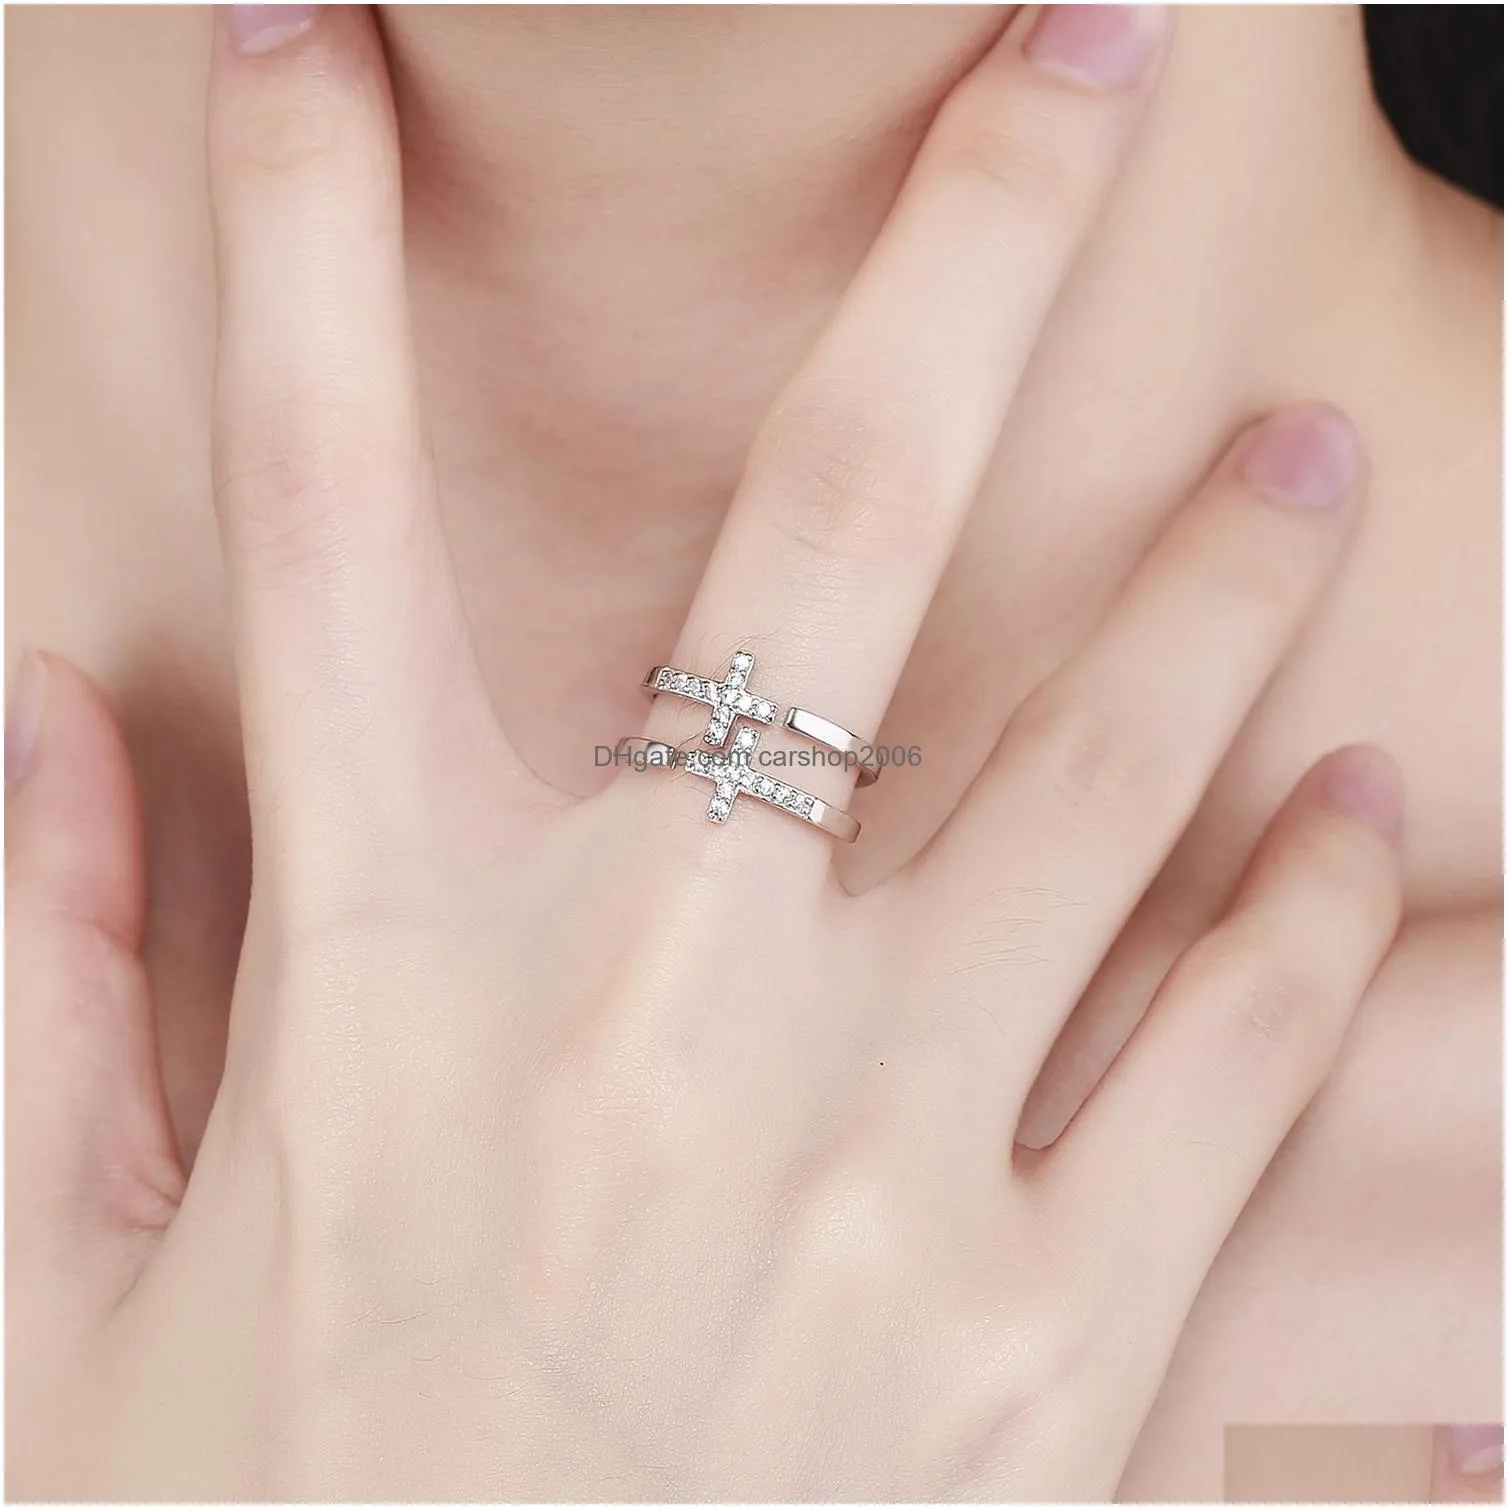 double layer diamond jesus cross ring band finger open adjustable hollow stacking rings women couple fashion jewelry gift will and